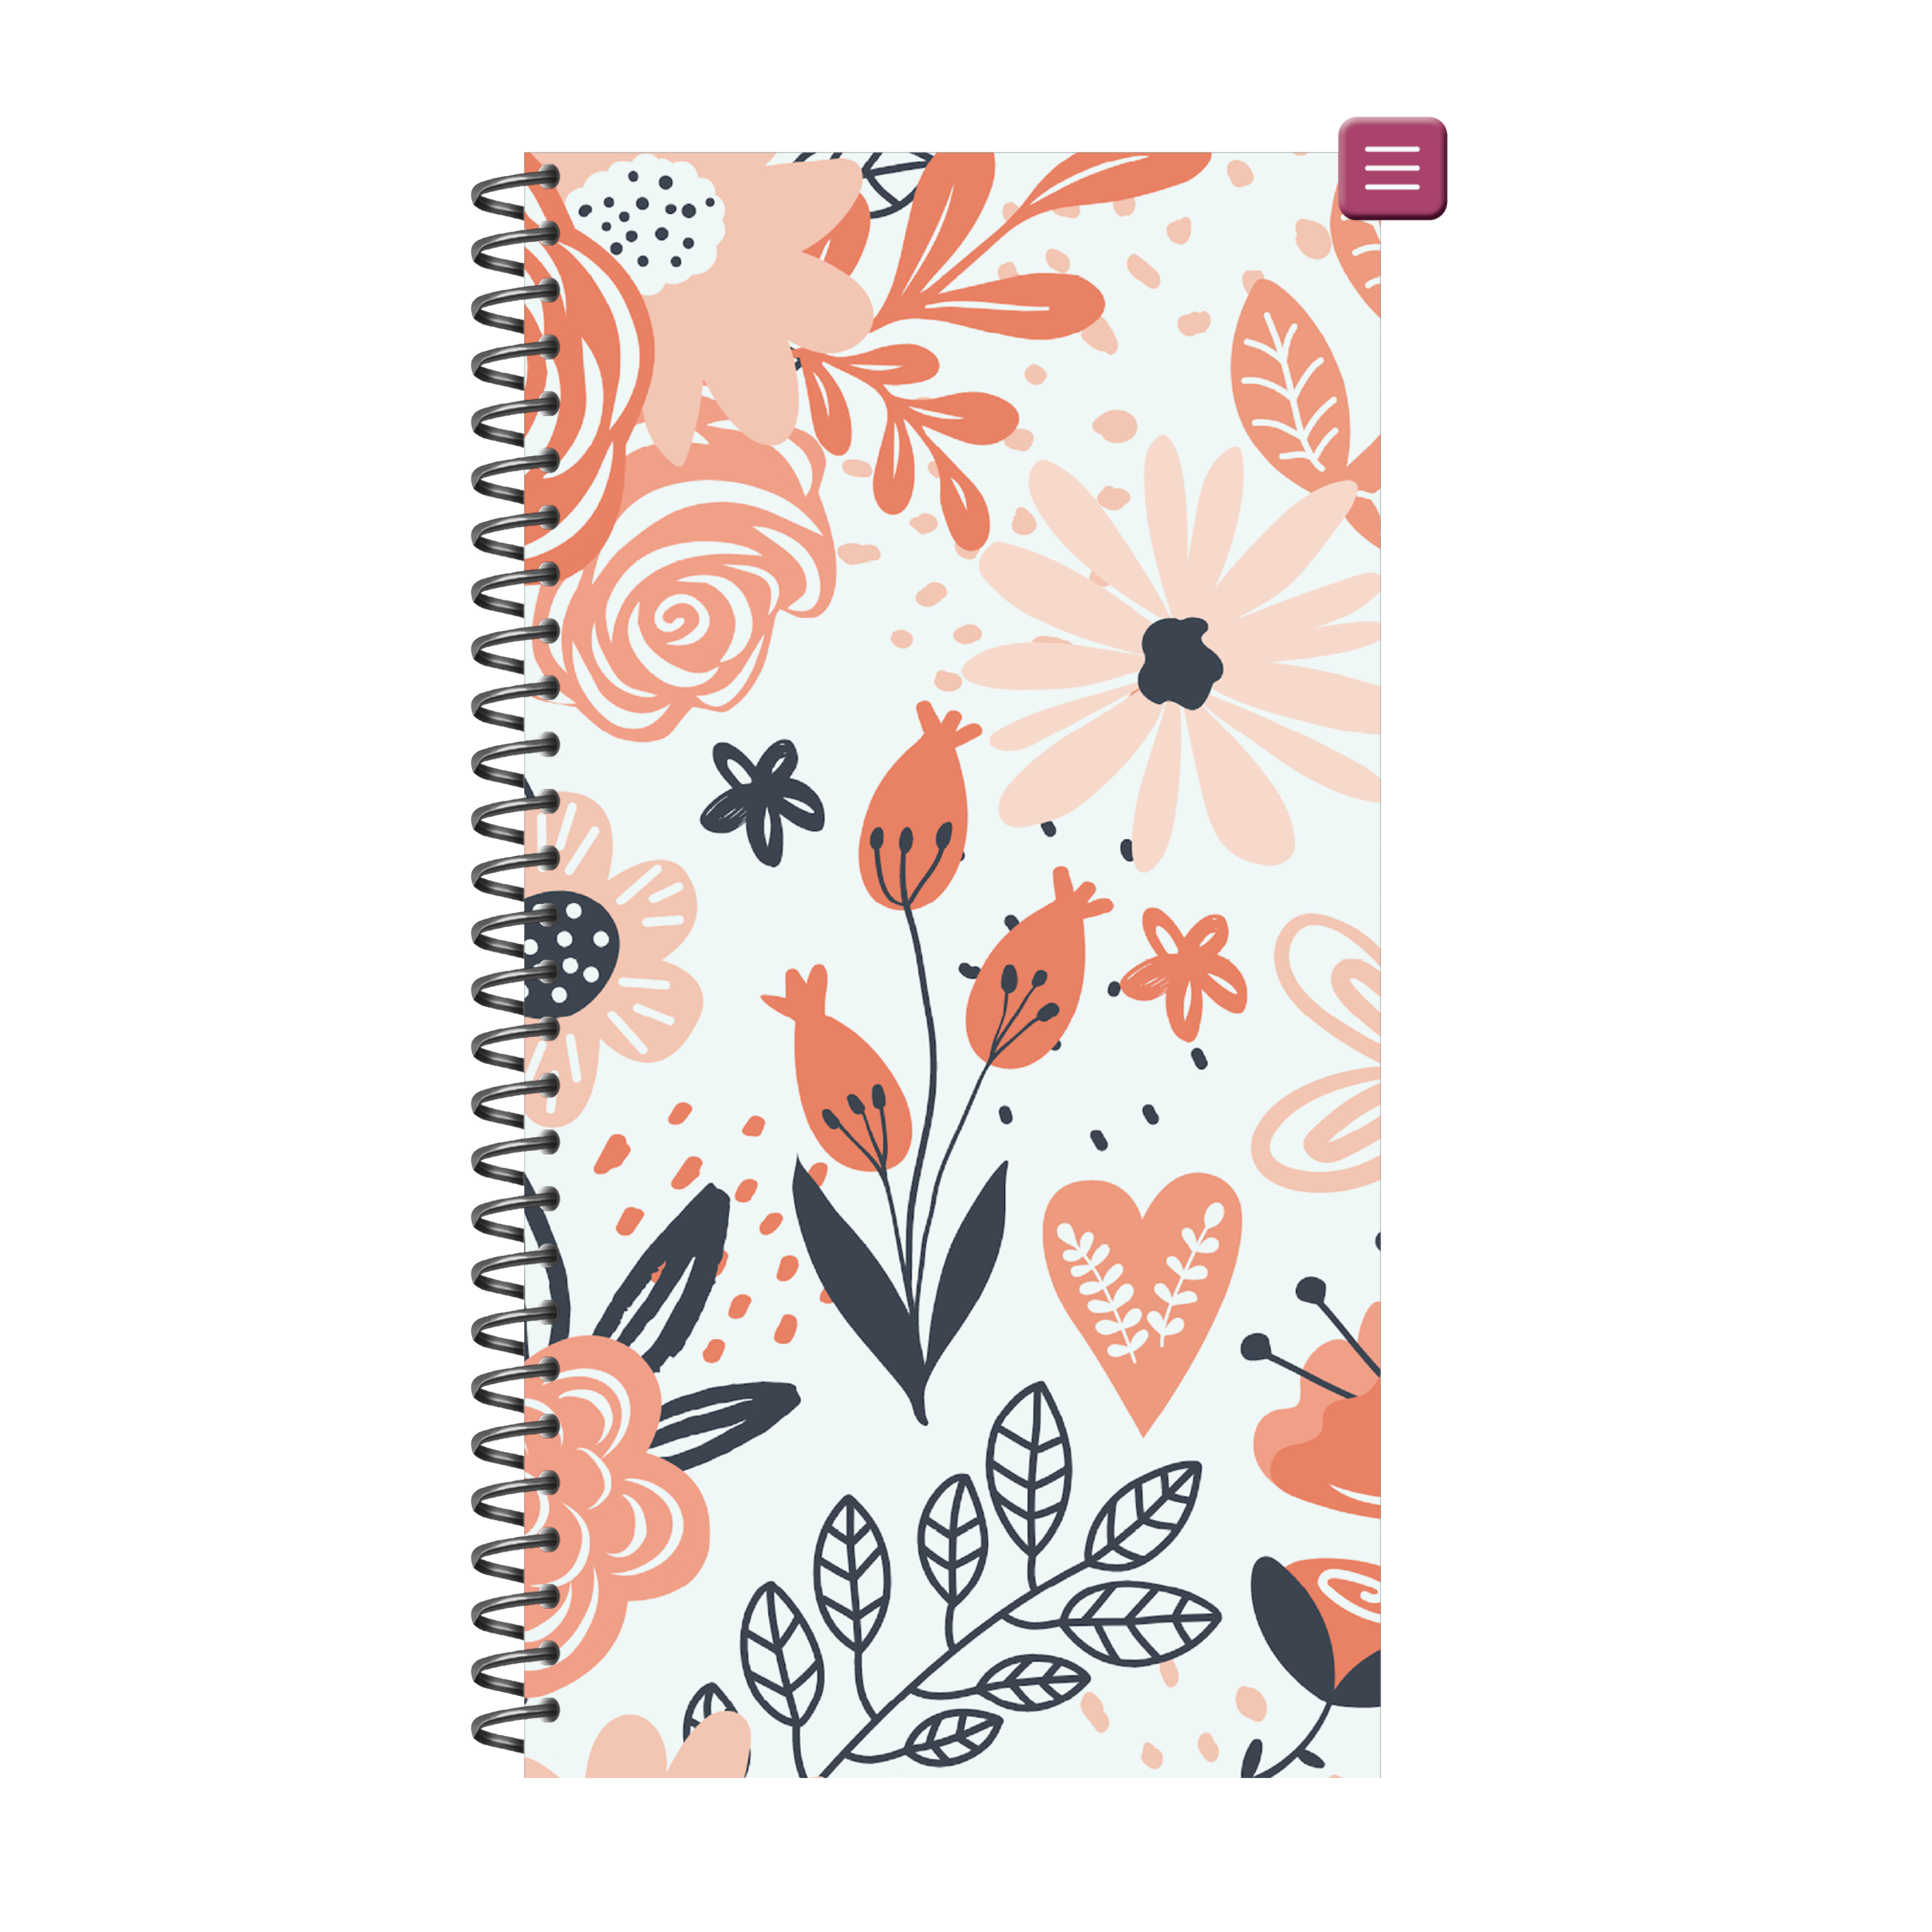 PhoneLife Interchangeable Digital Planner Cover | MIDNIGHT BOHO BLOSSOMS 7